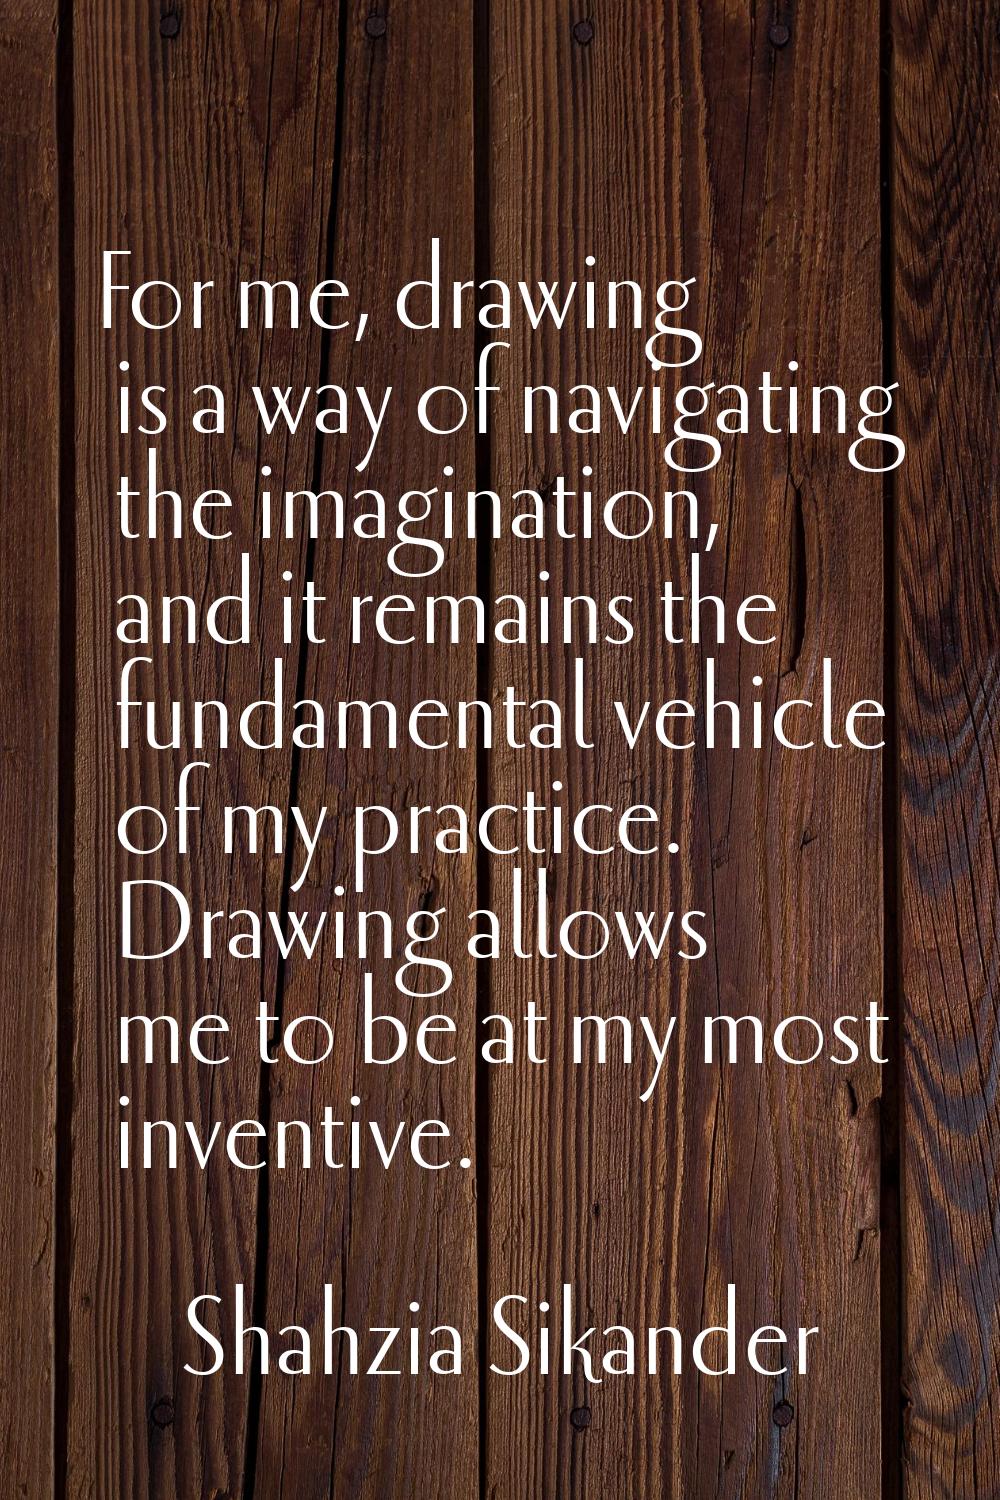 For me, drawing is a way of navigating the imagination, and it remains the fundamental vehicle of m